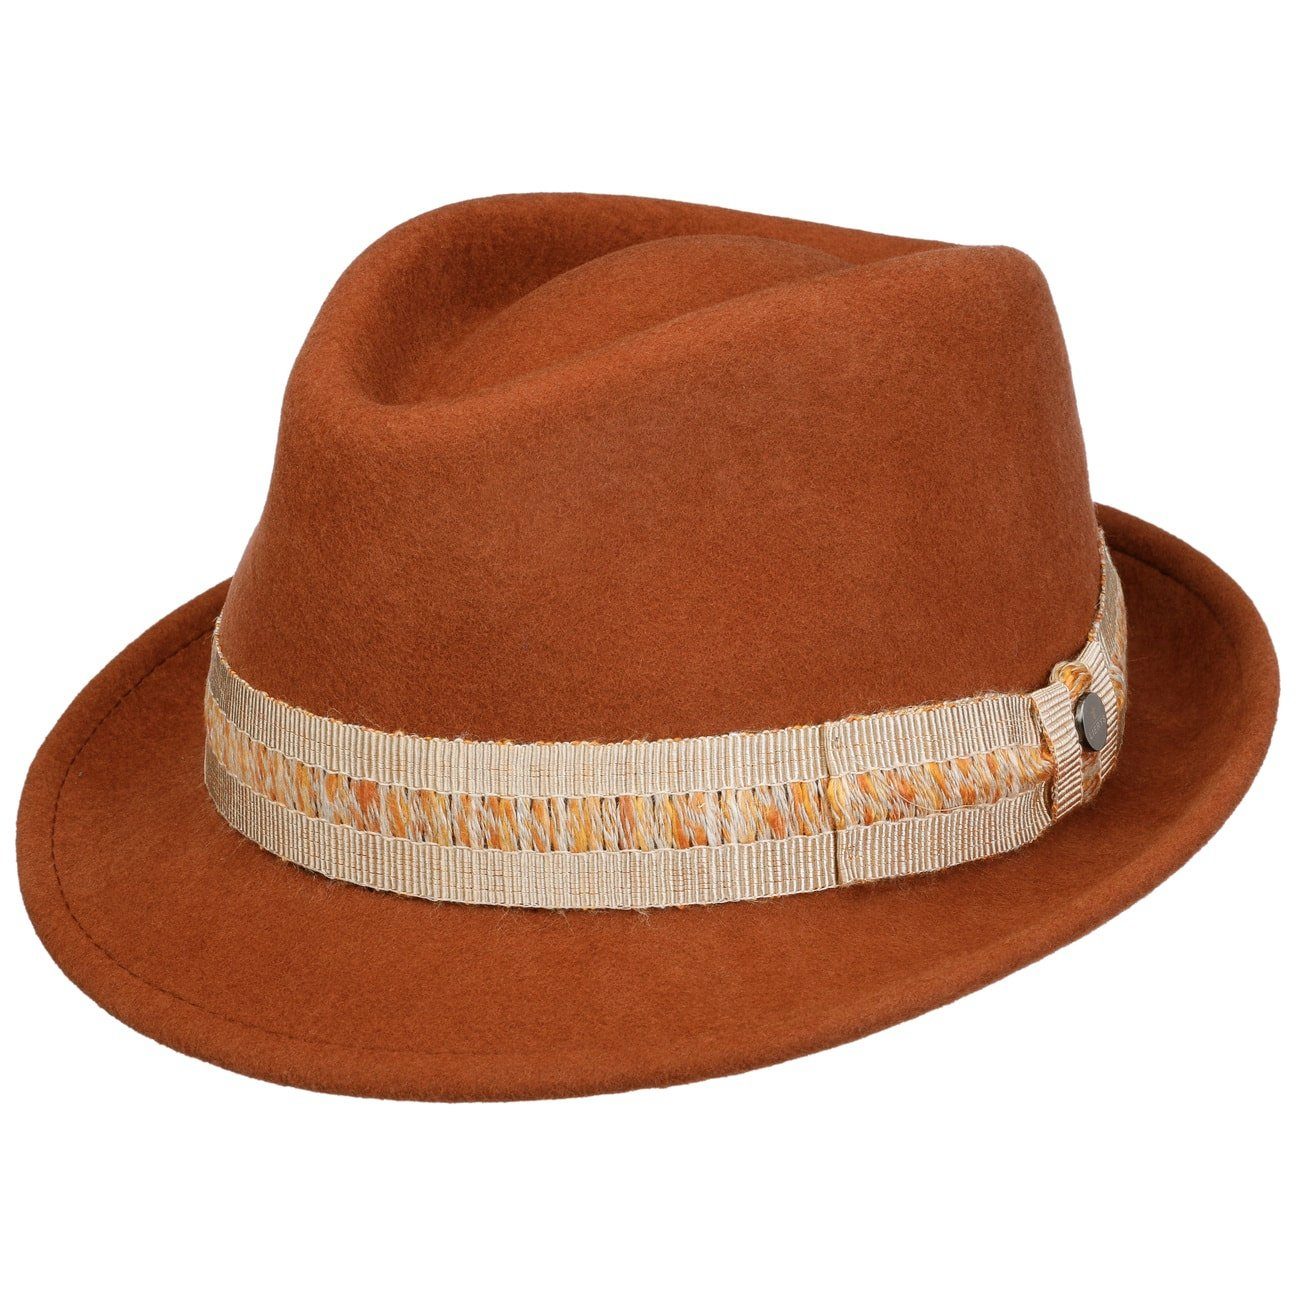 Lierys Trilby (1-St), Made in Italy rost